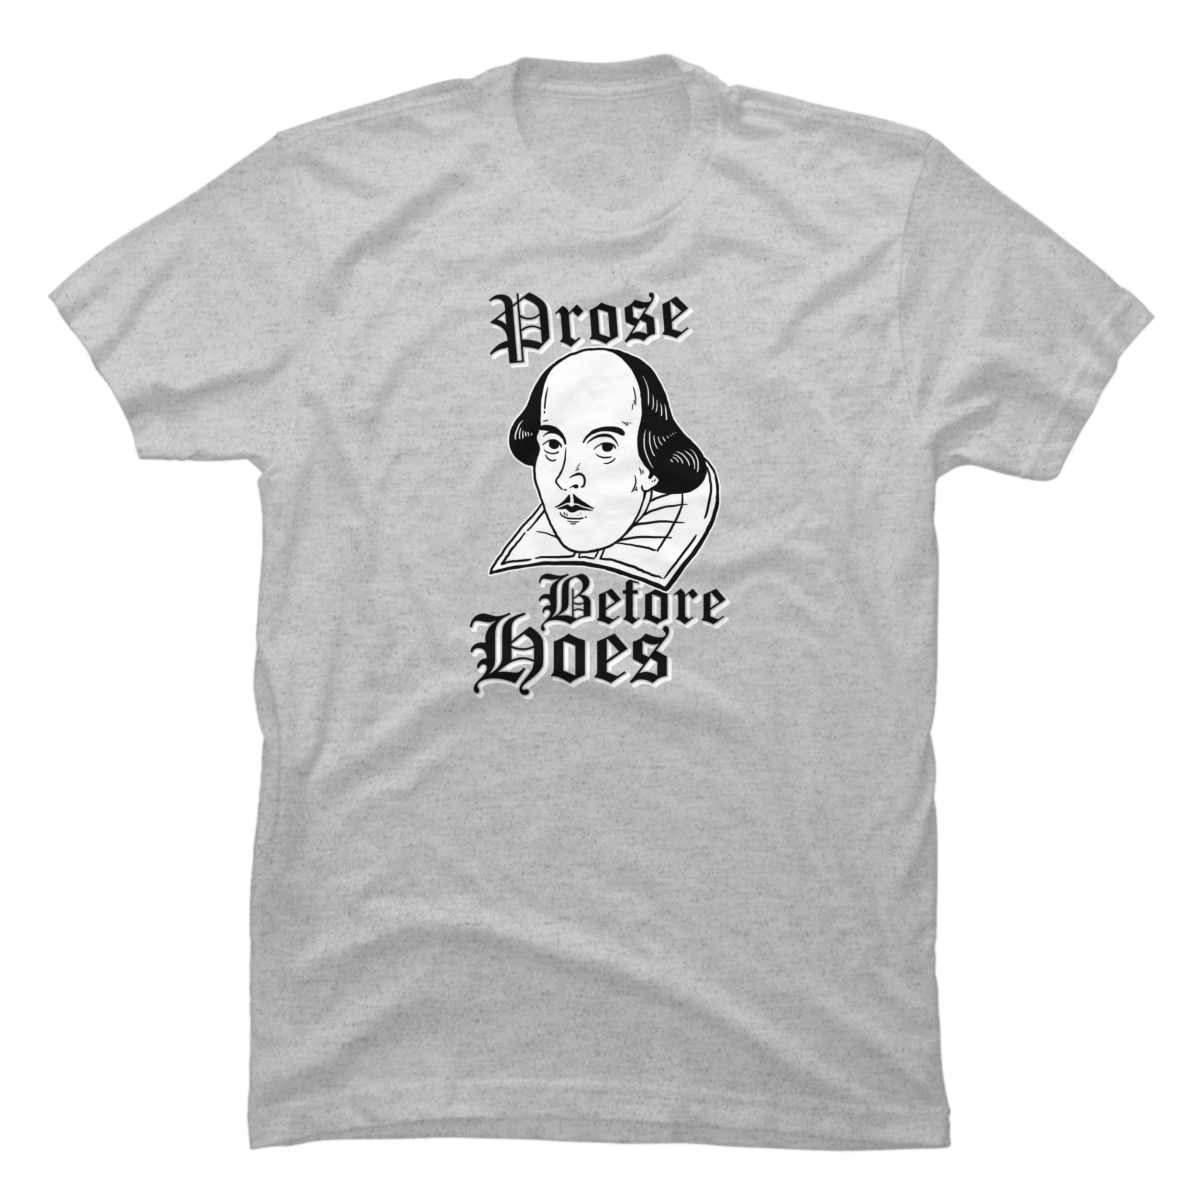 prose before hoes shirt